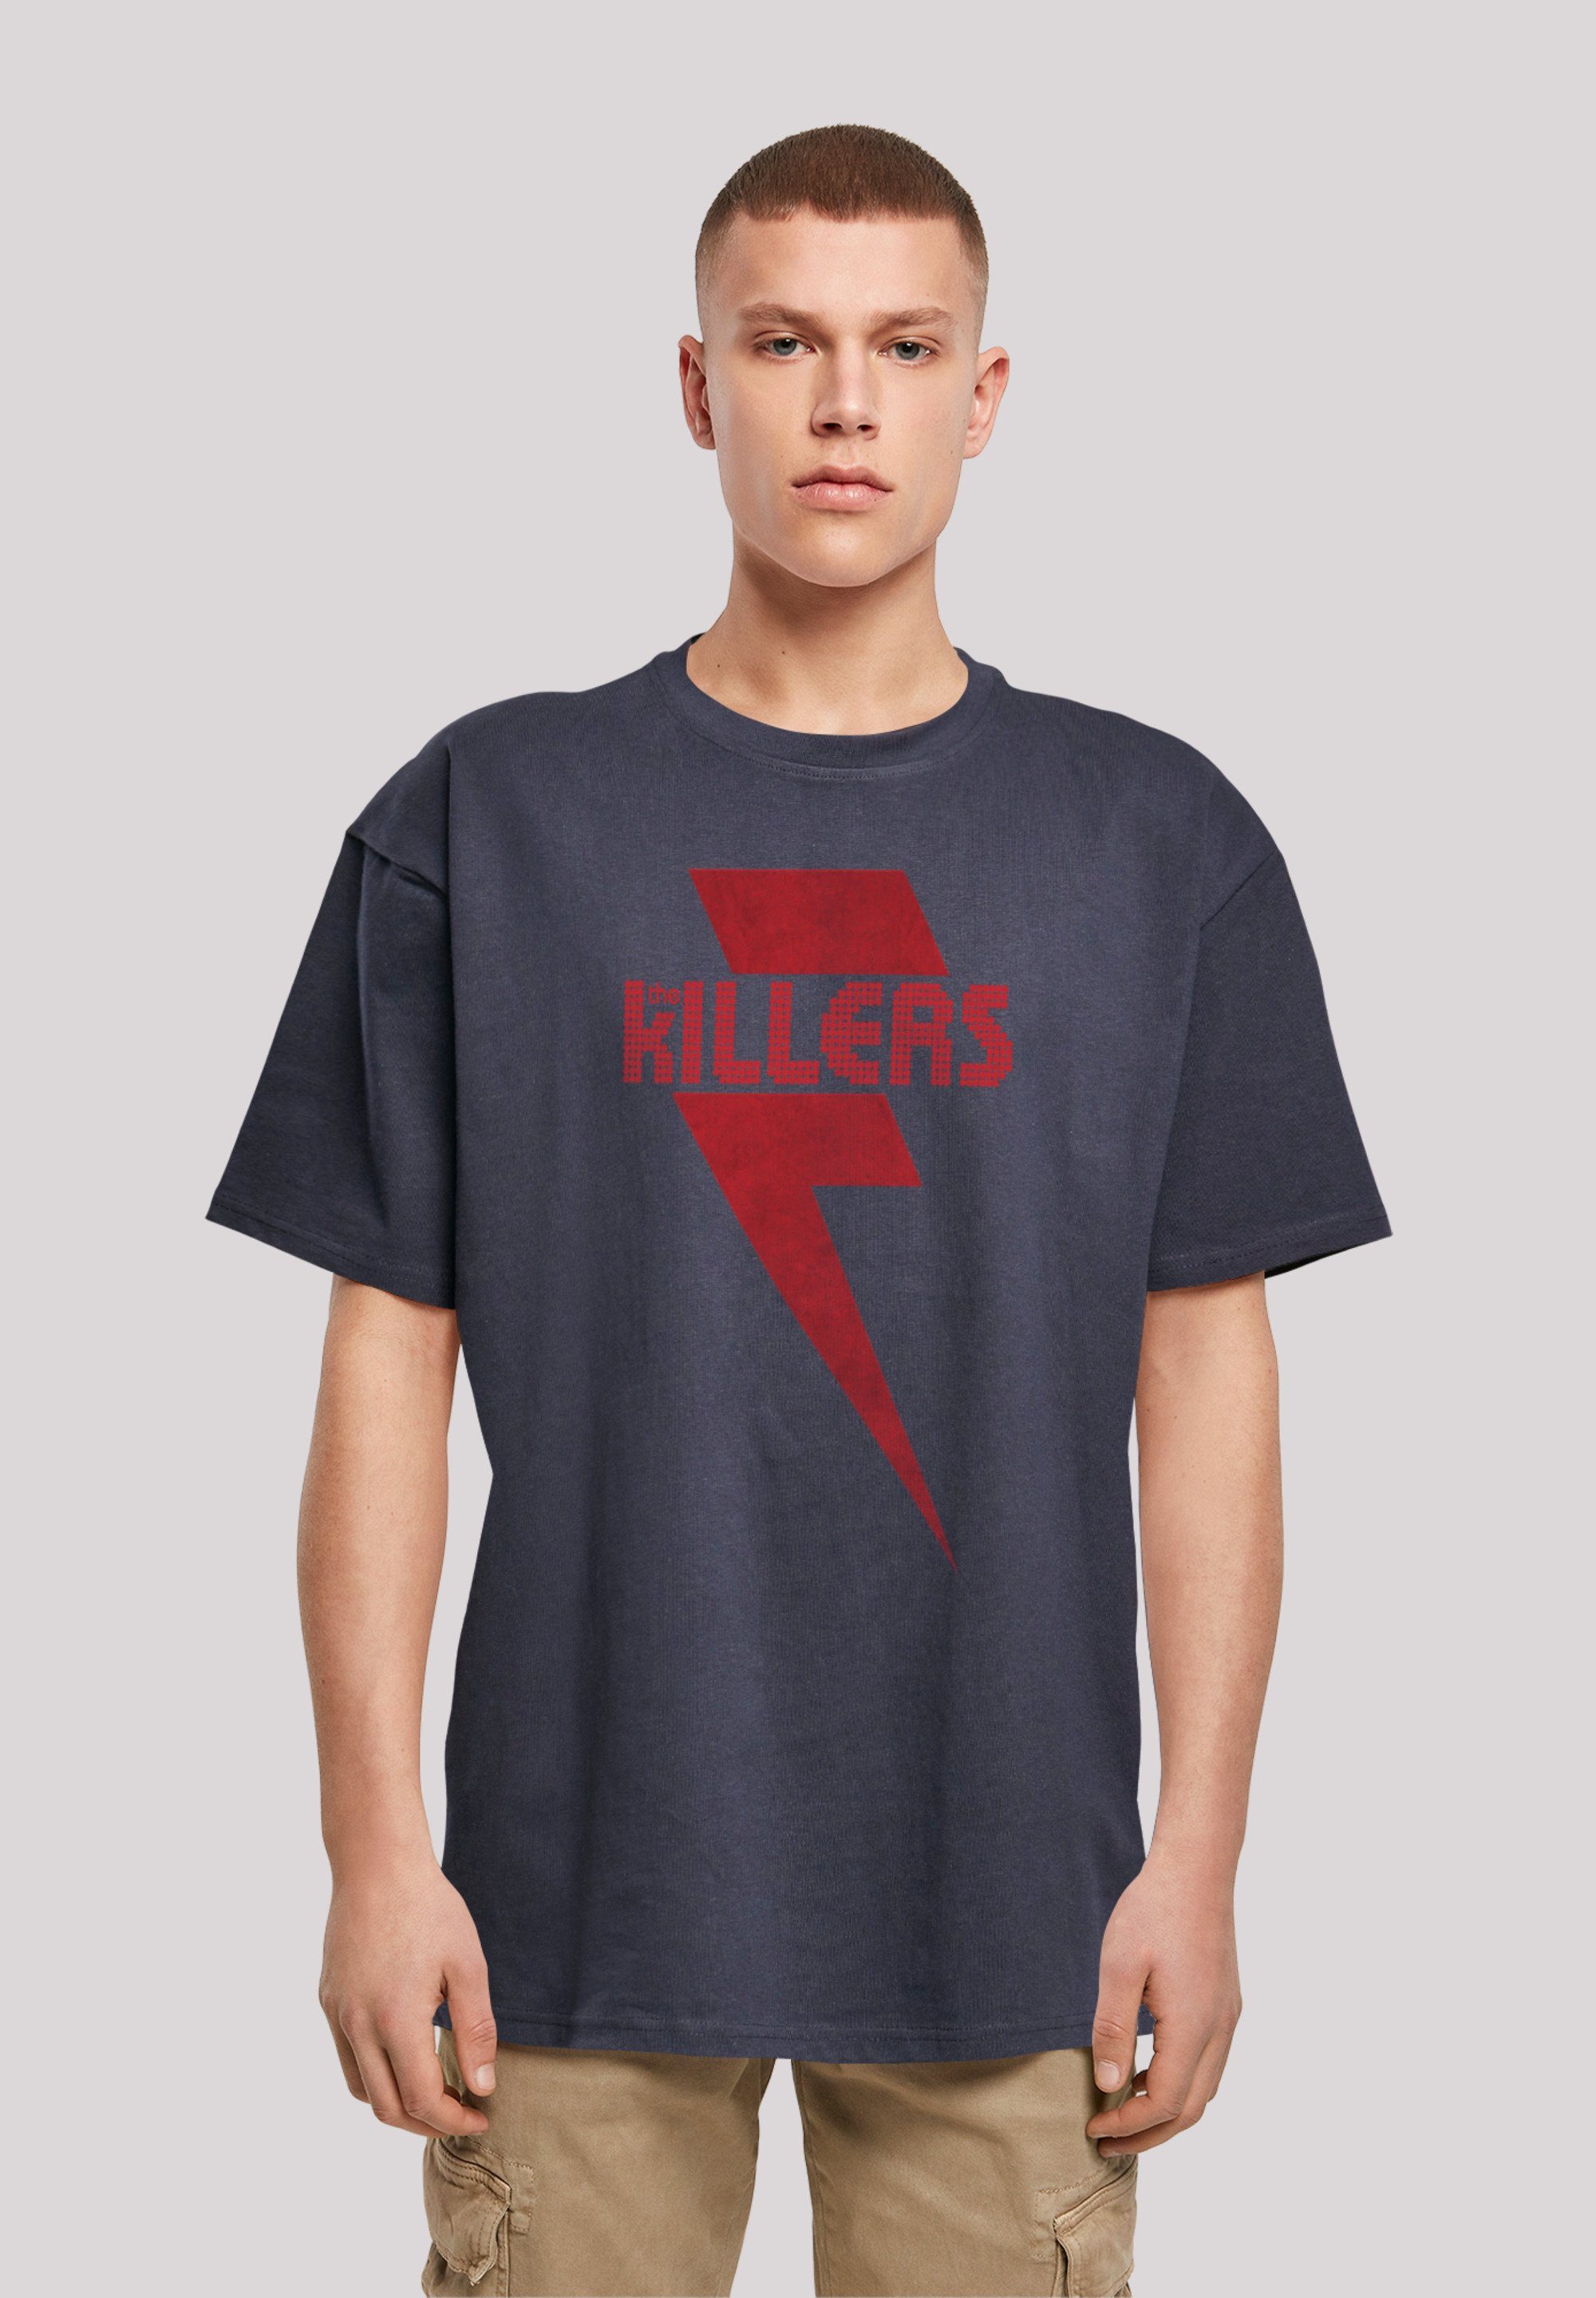 Rock Band Print T-Shirt Red Killers navy The F4NT4STIC Bolt